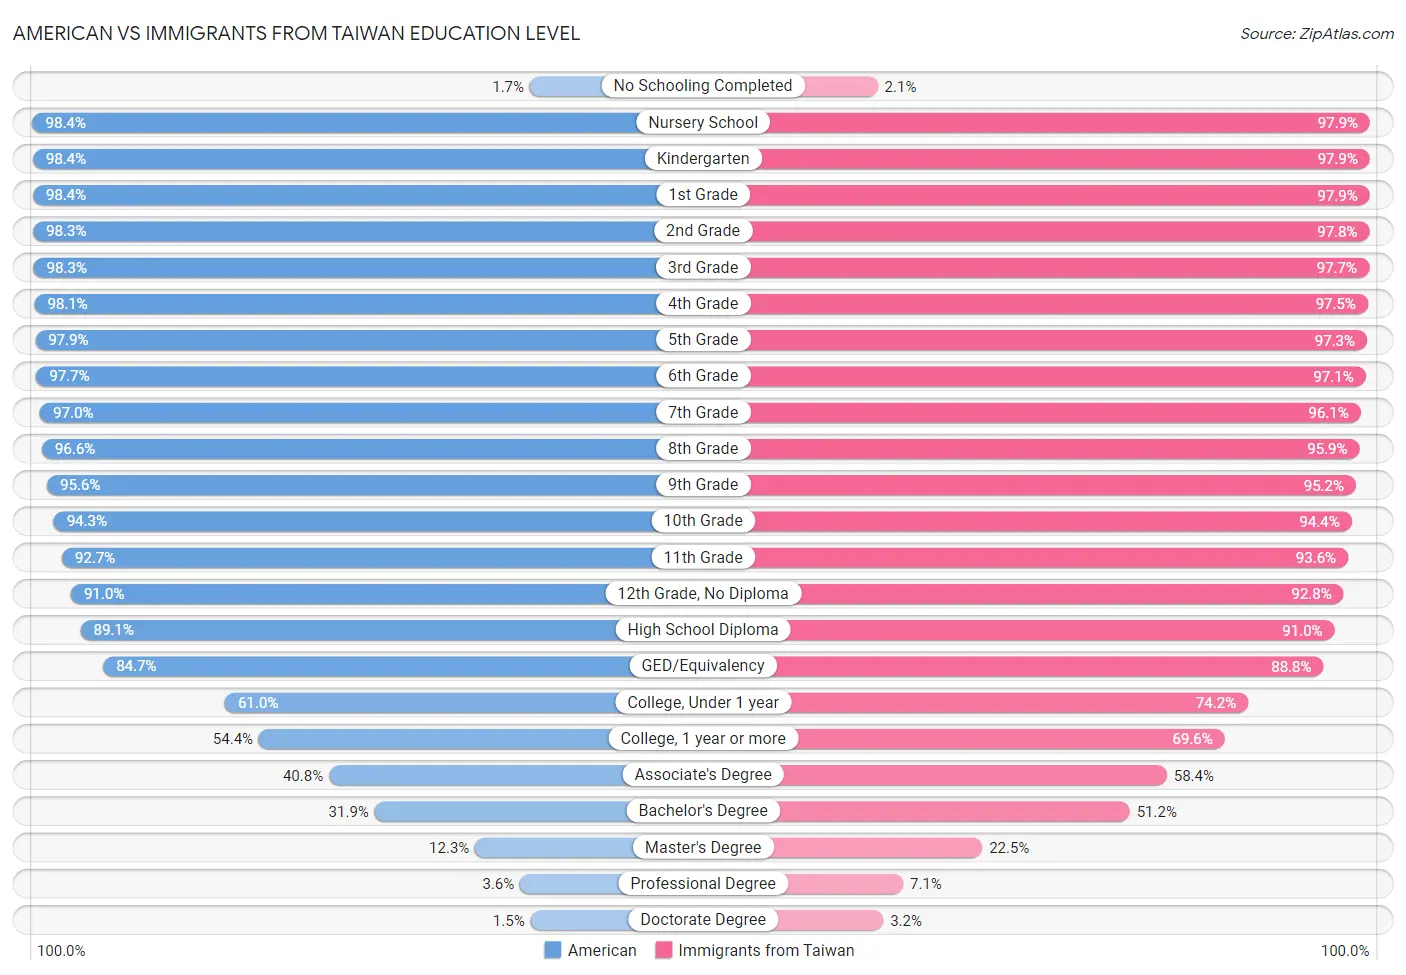 American vs Immigrants from Taiwan Education Level